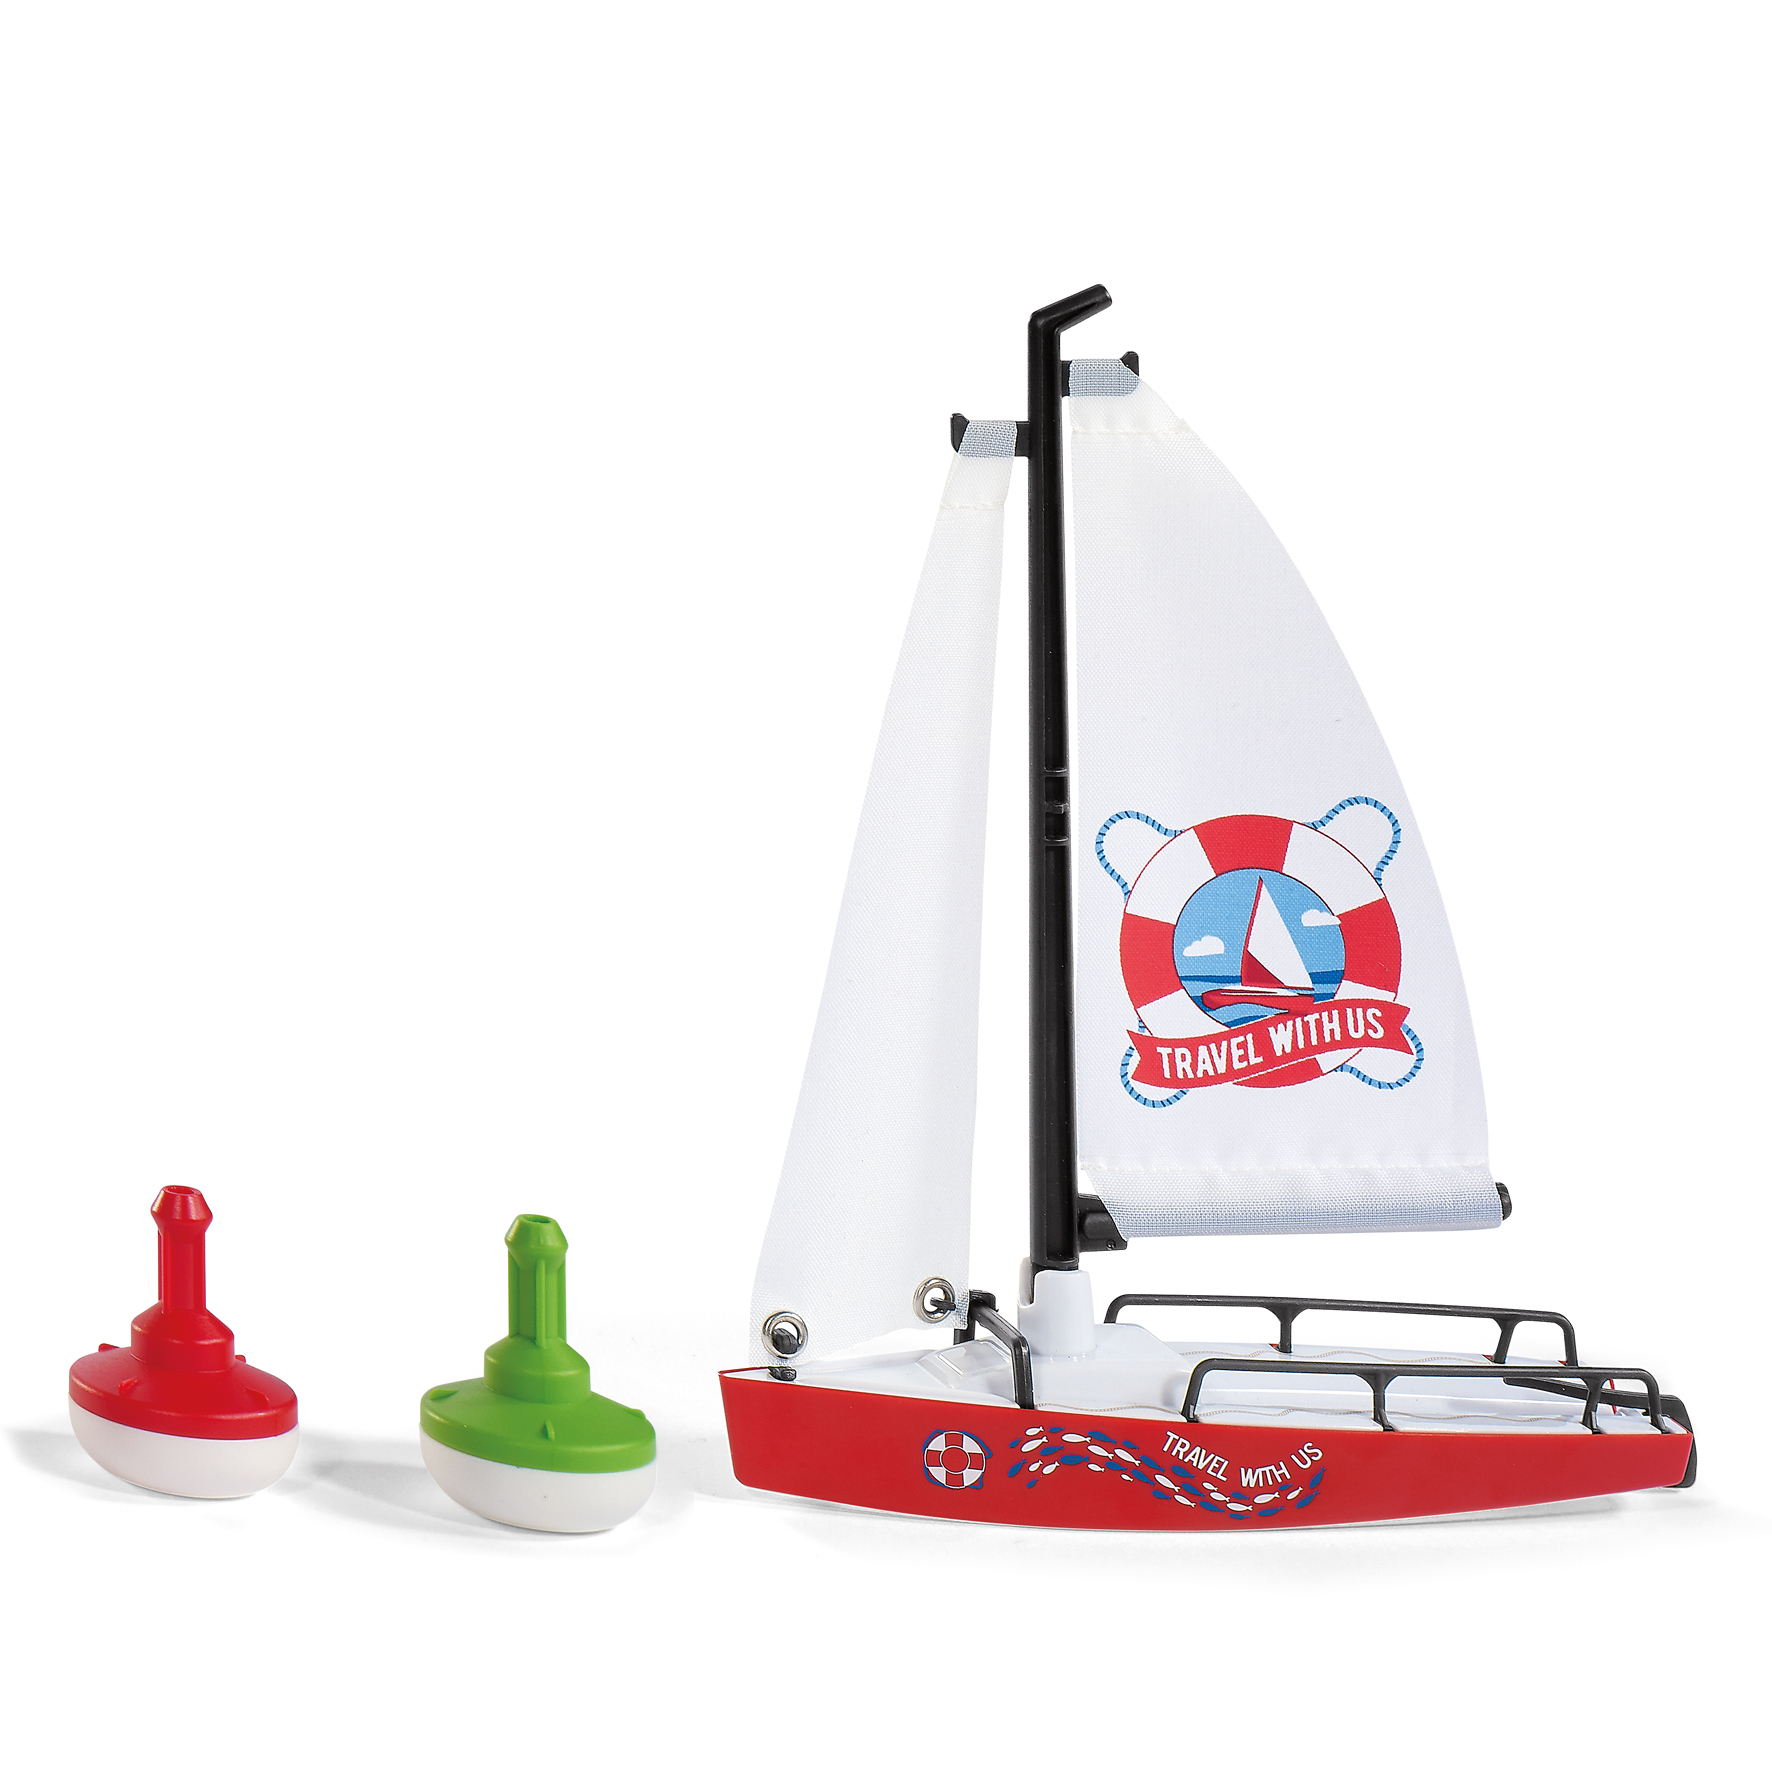 Toy planes & boats siku sailboat with buoys 1:50